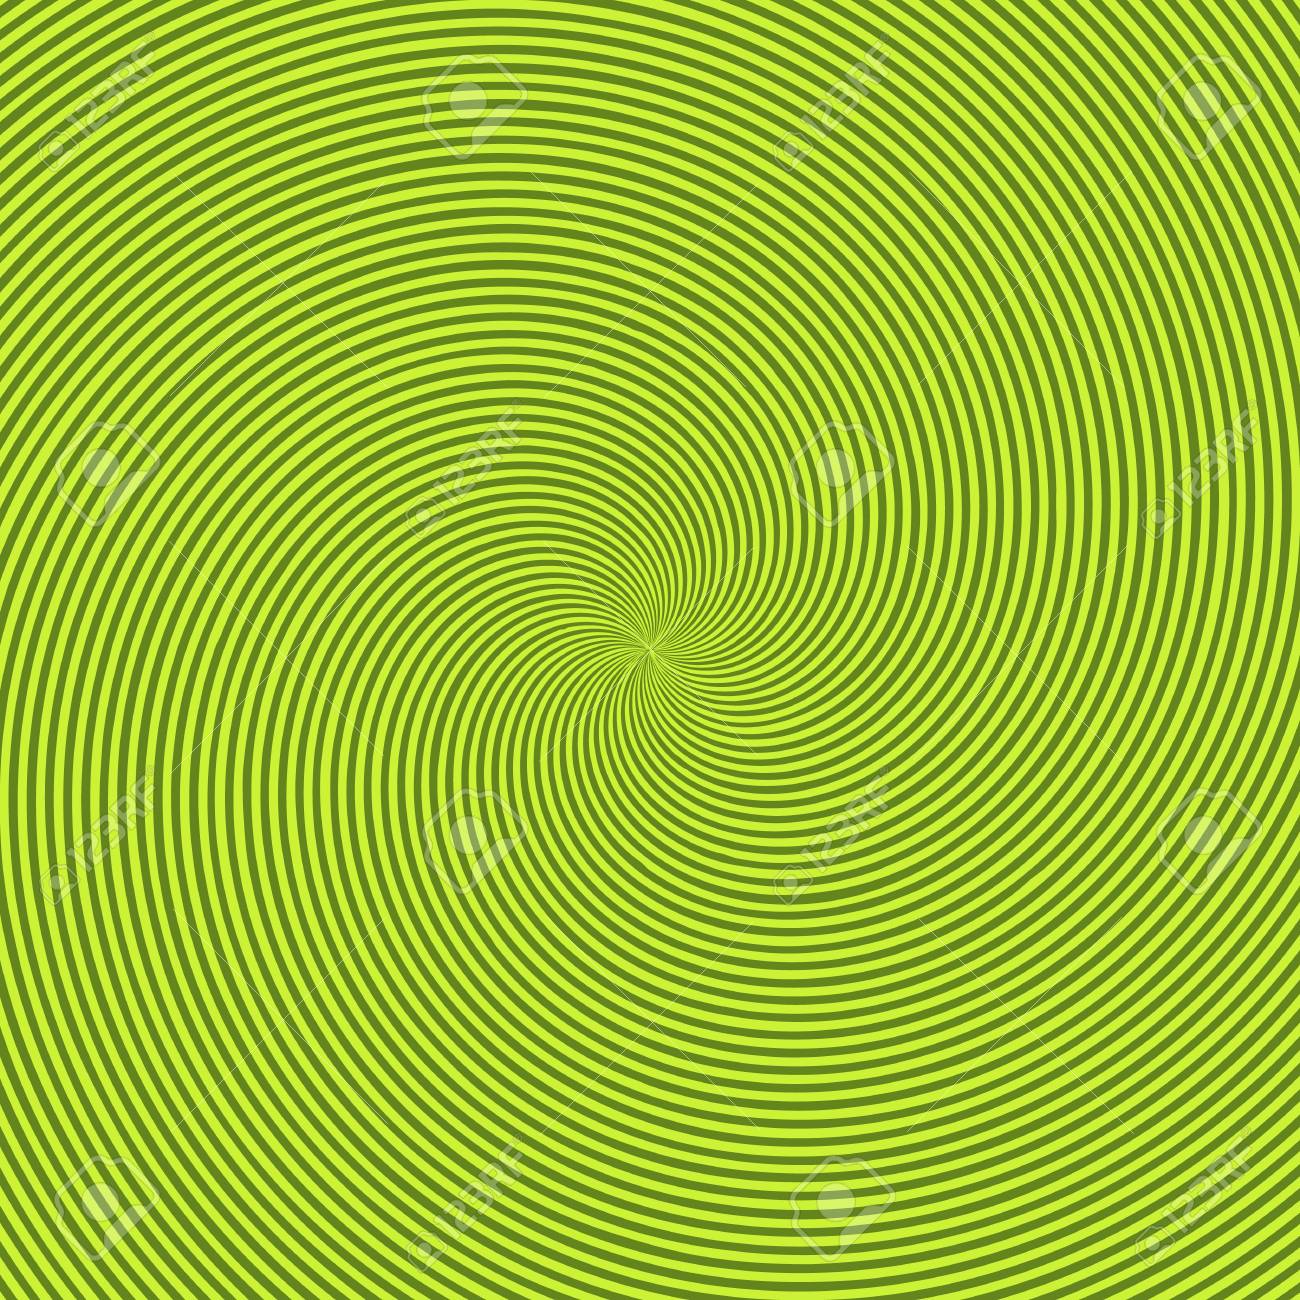 Green Radiant Background With Circular Swirl Helix Or Twist